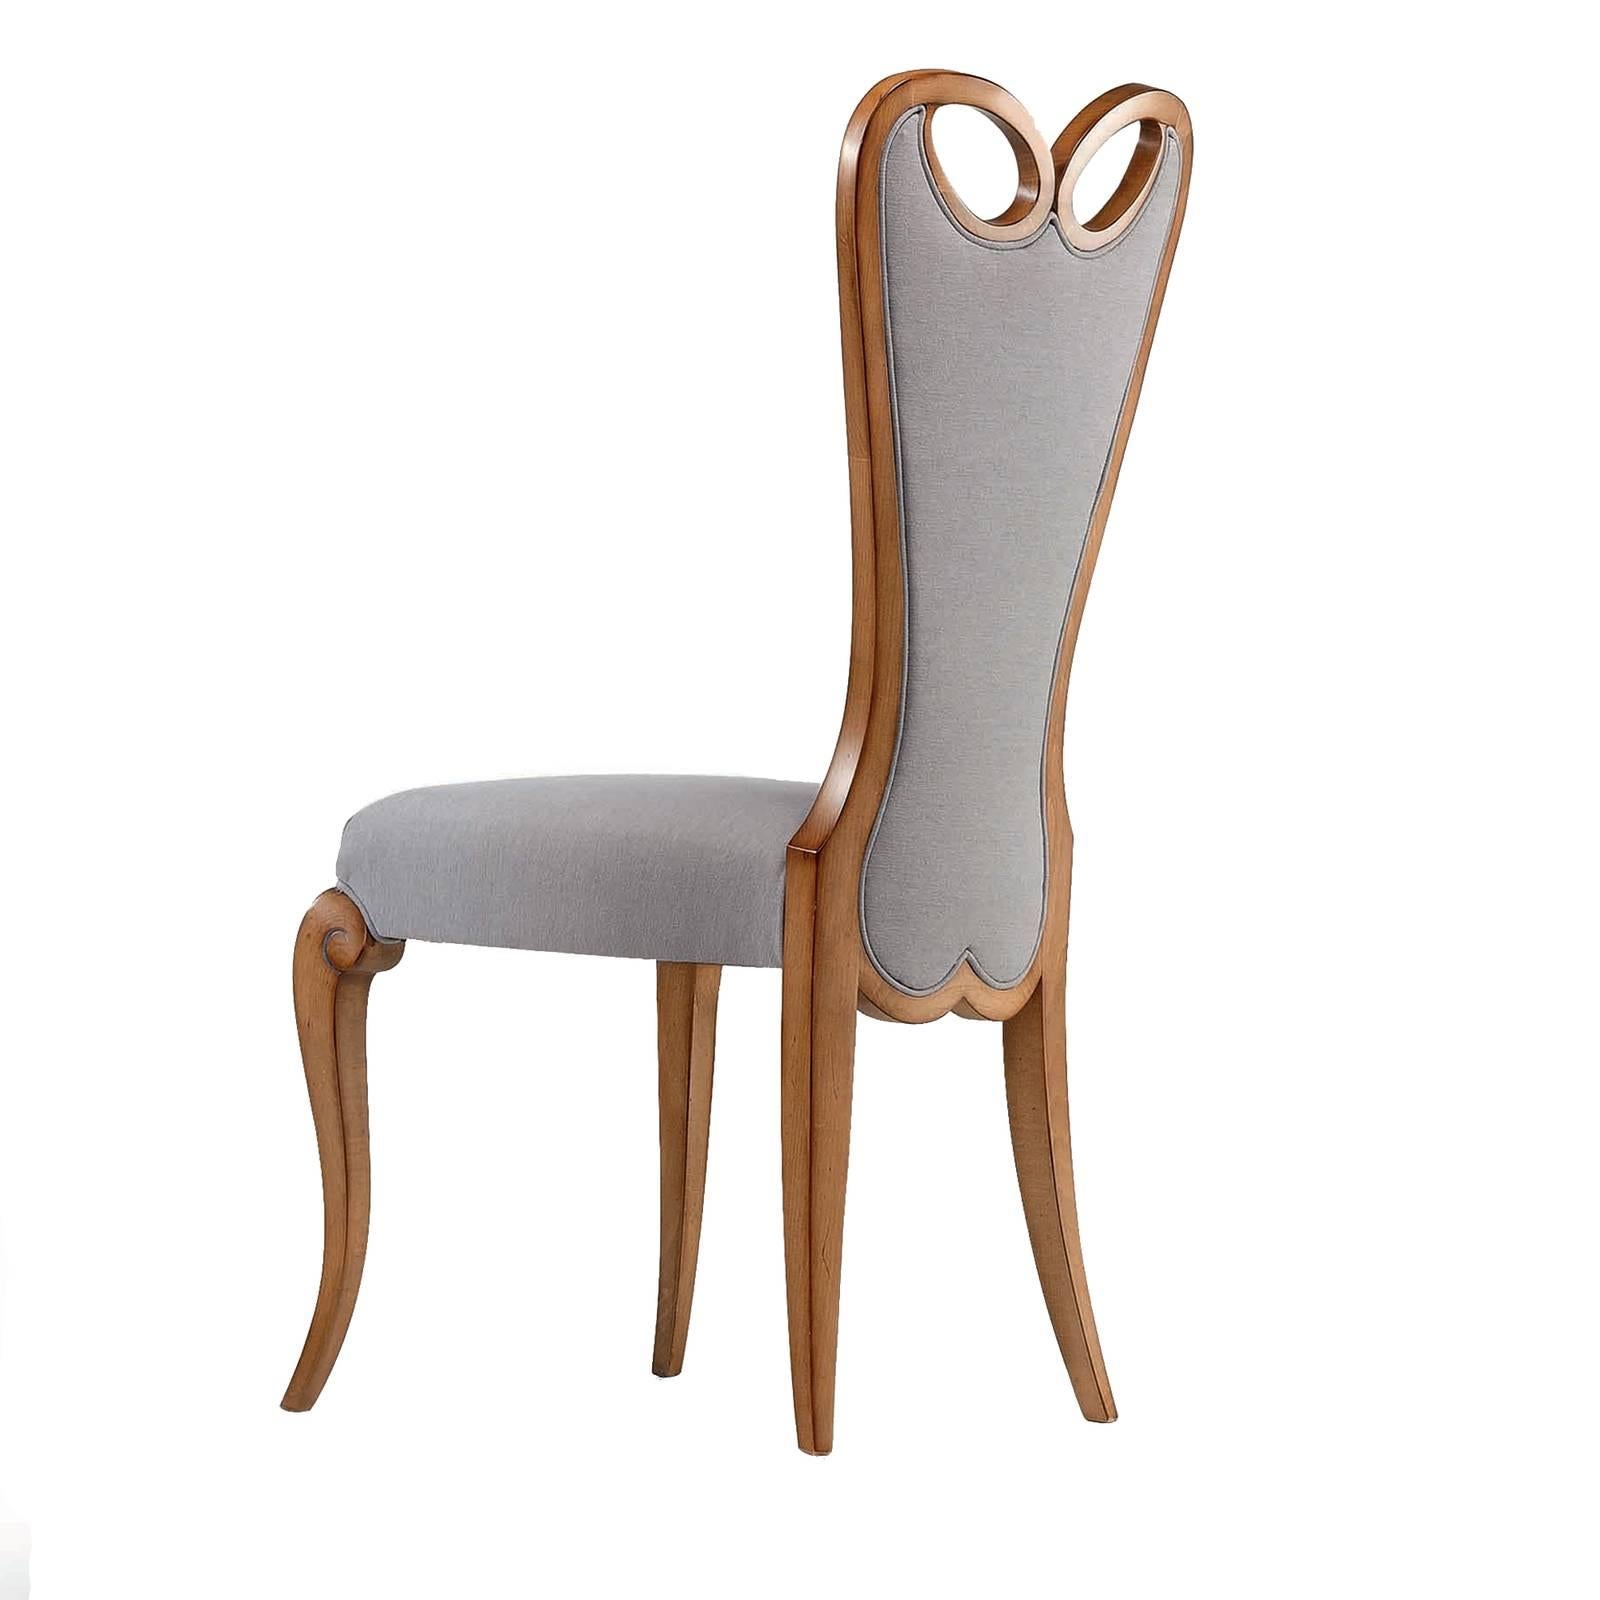 A modern take on a classic French-Baroque style, this chair merges comfort with style. Characterized by flowing lines, the wooden frame is upholstered with a light grey soft fabric on the back and seat cushion. The tall backrest boasts a heart-shape